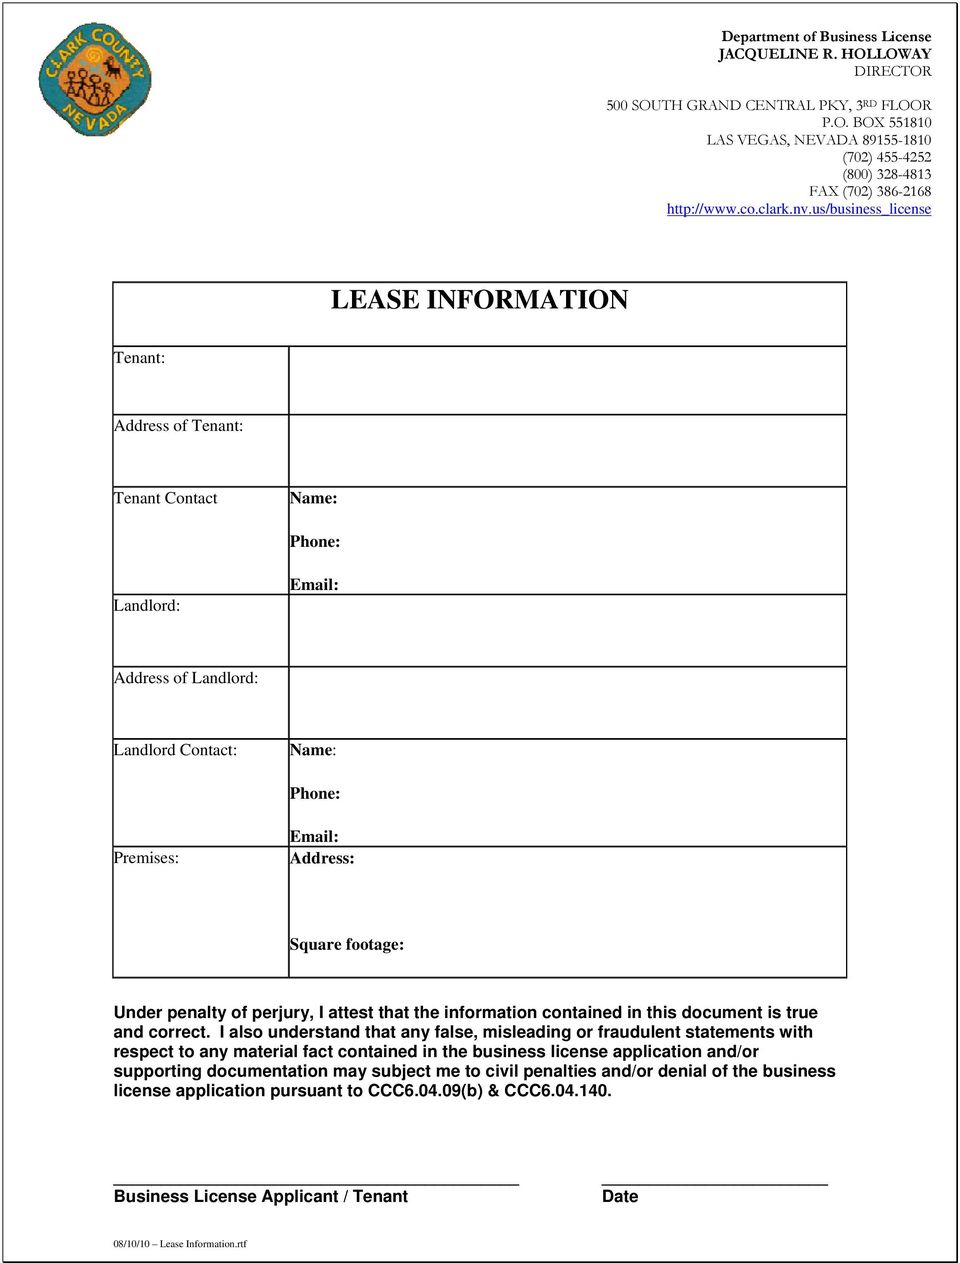 us/business_license LEASE INFORMATION Tenant: Address of Tenant: Tenant Contact Name: Phone: Landlord: Email: Address of Landlord: Landlord Contact: Name: Phone: Premises: Email: Square footage: